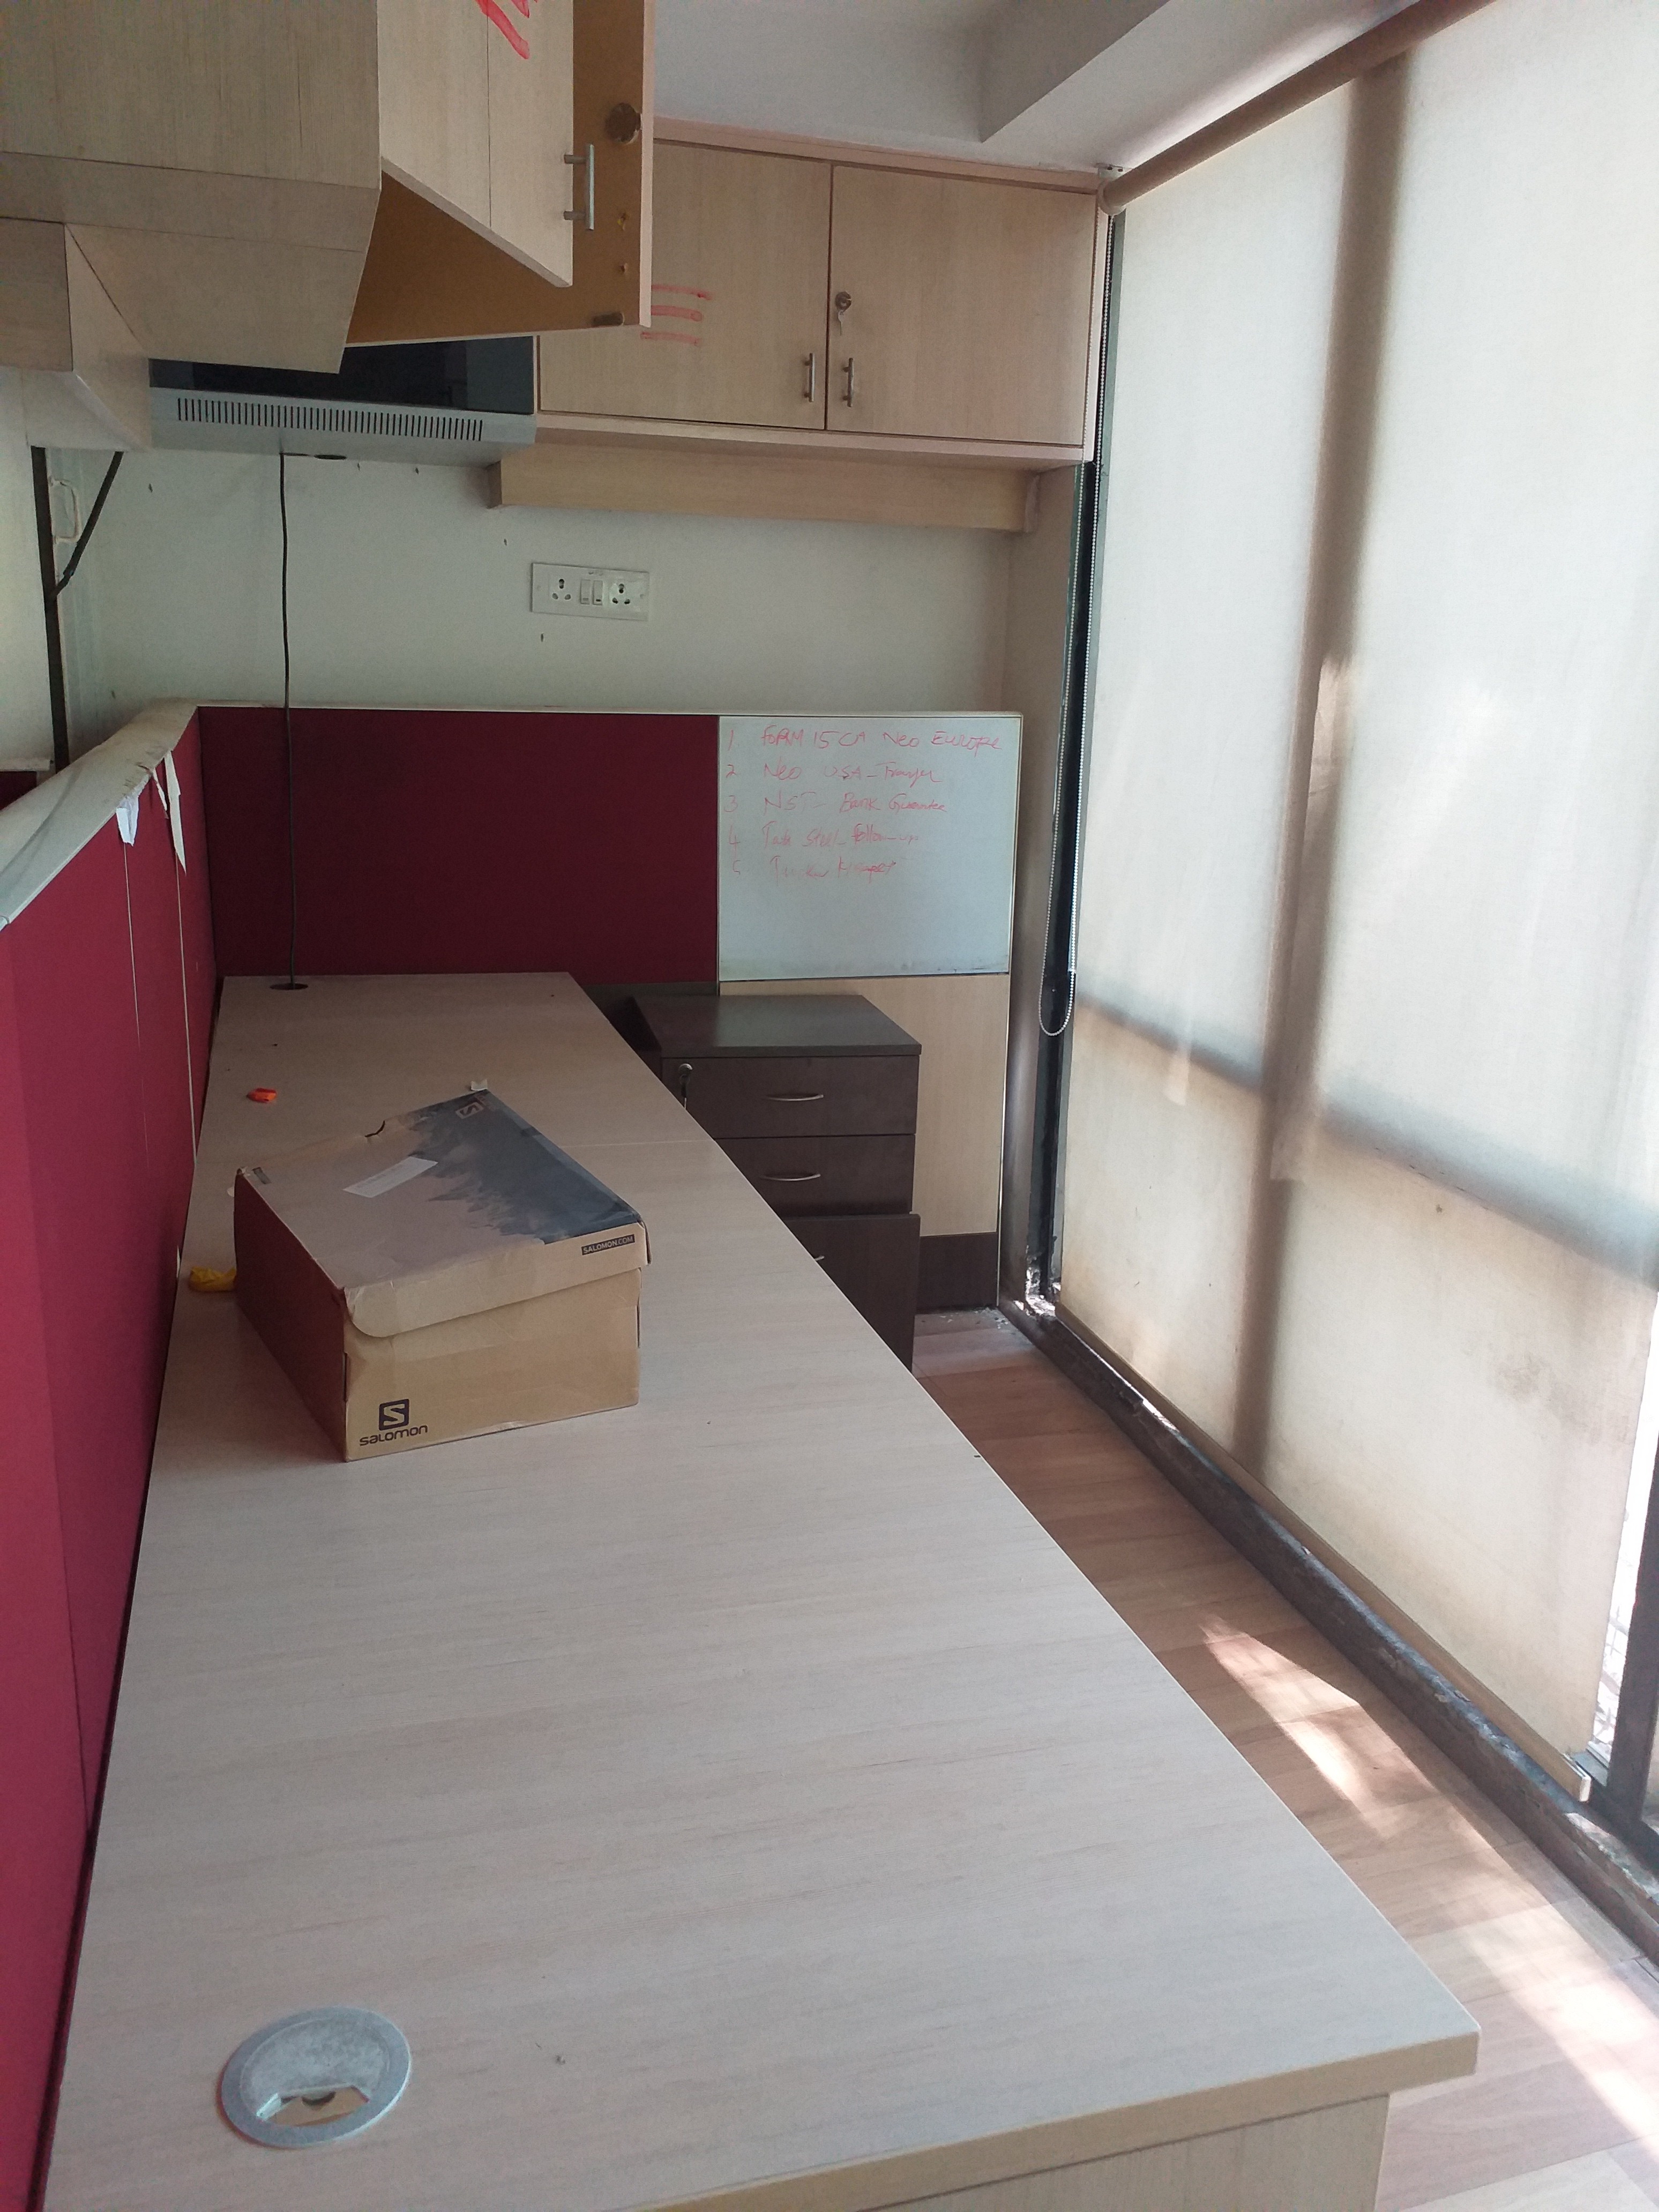 Cunningham Road: Exclusive furnished office space for rent